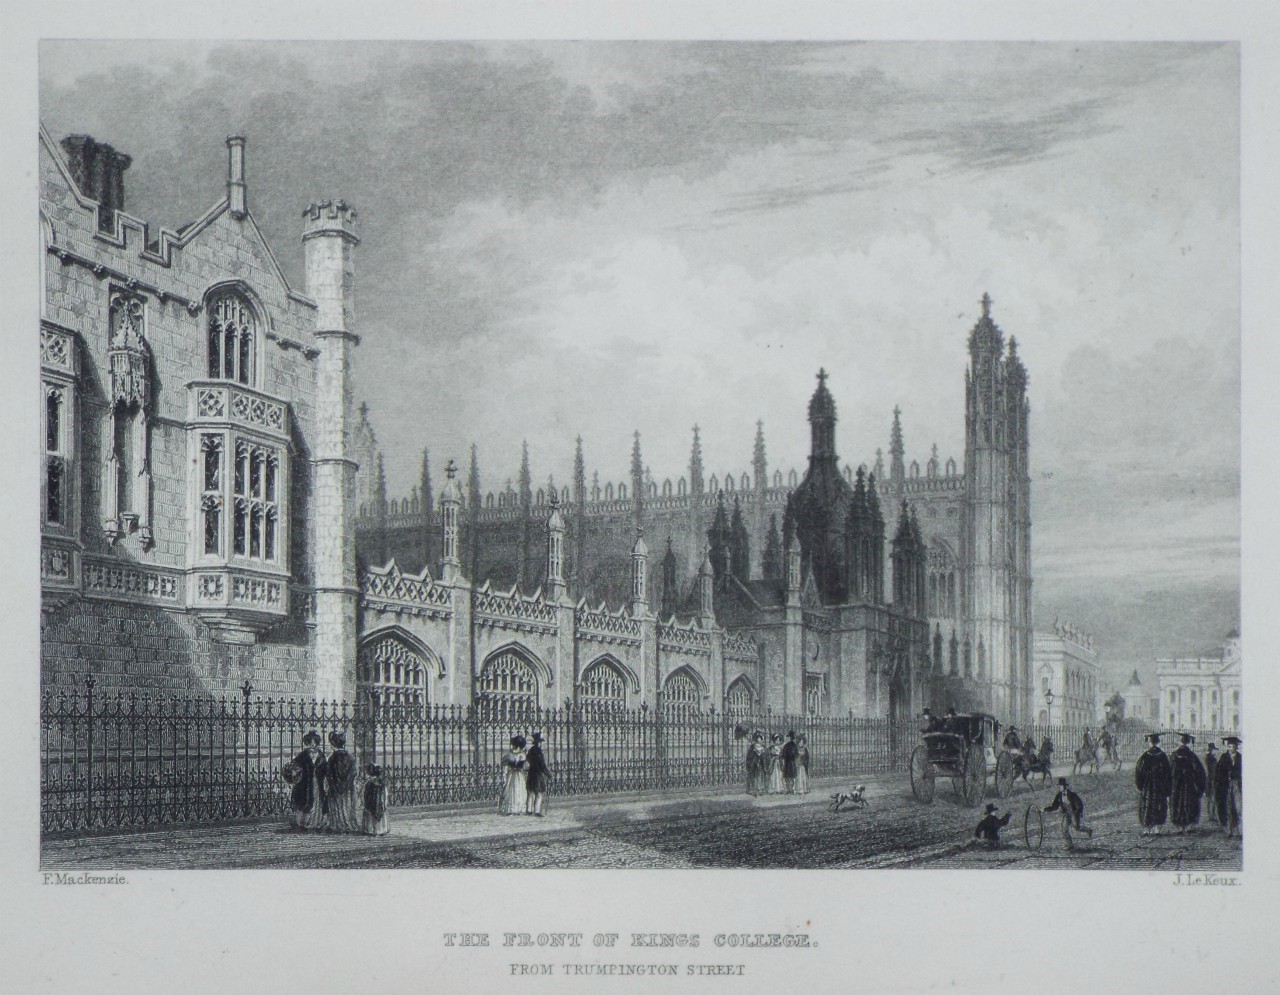 Print - The Front of Kings College. From Trumpington Street - Le